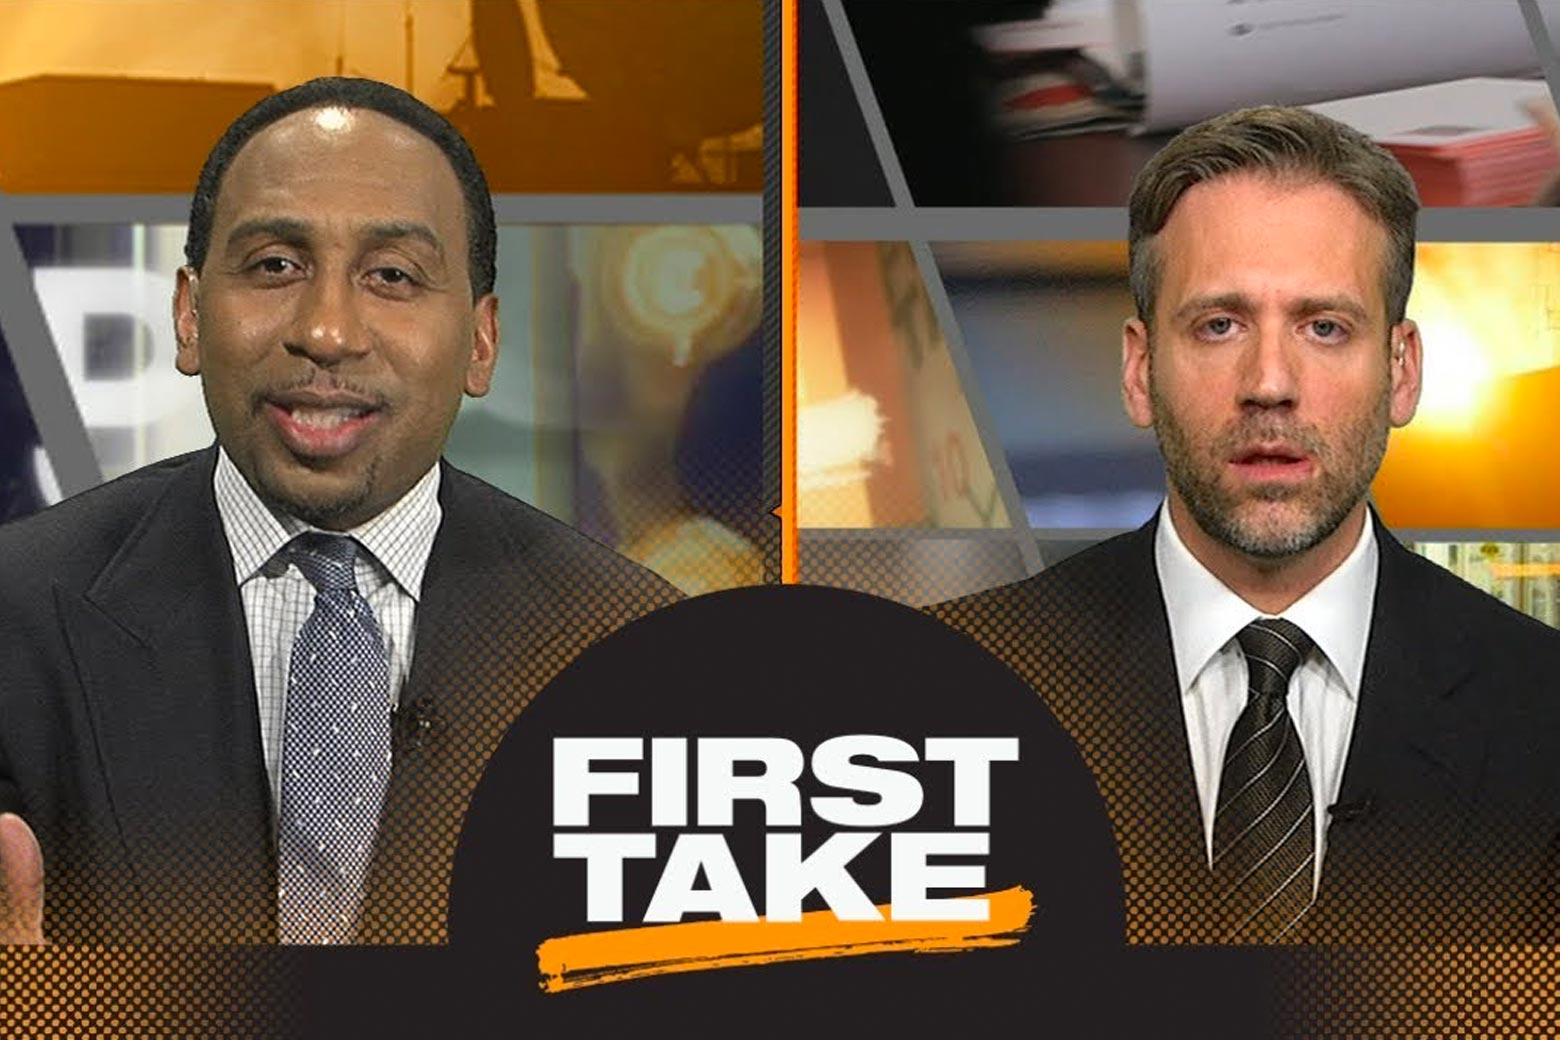 Stephen A. Smith and Max Kellerman on First Take, with the logo between them.